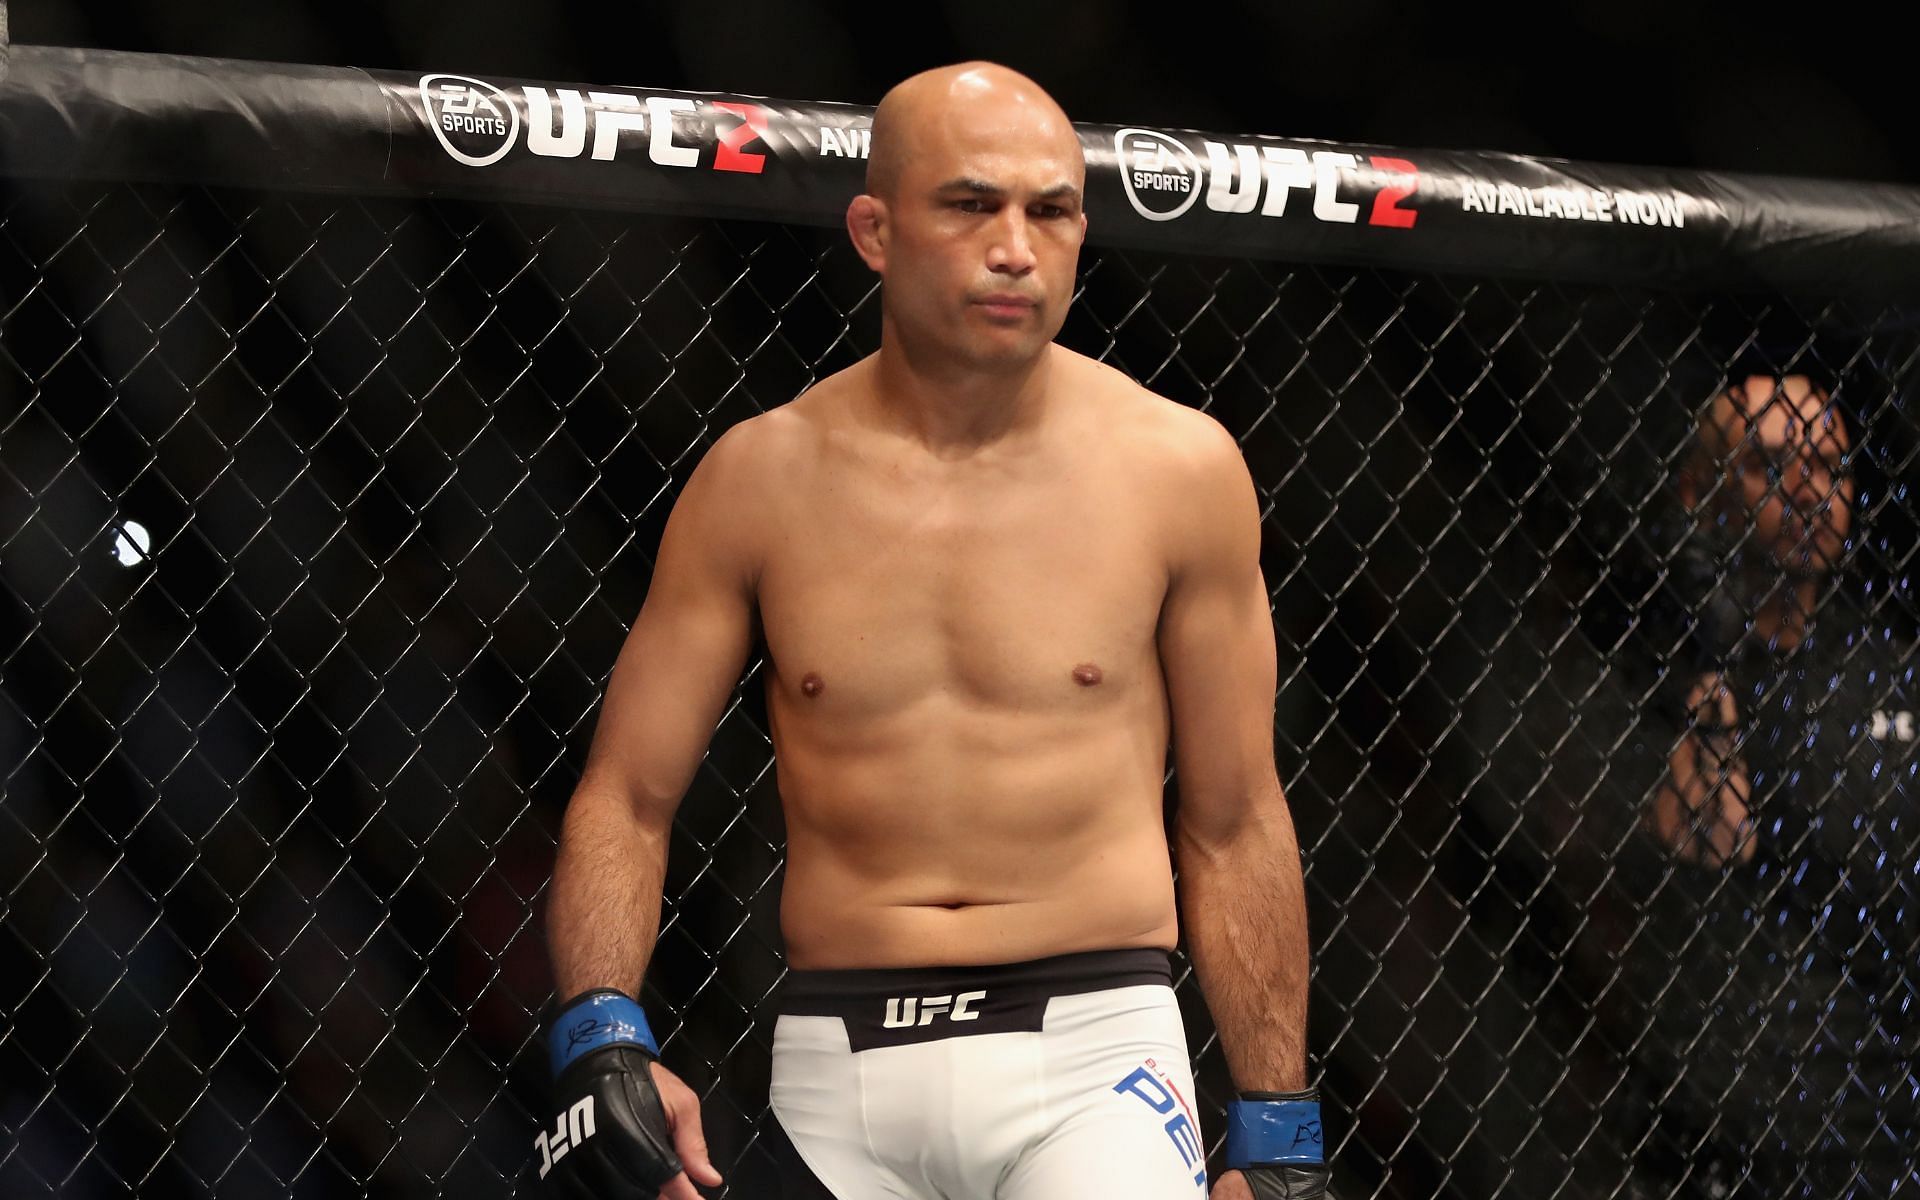 B.J. Penn before his fight against Yair Rodriguez at UFC Fight Night 103 